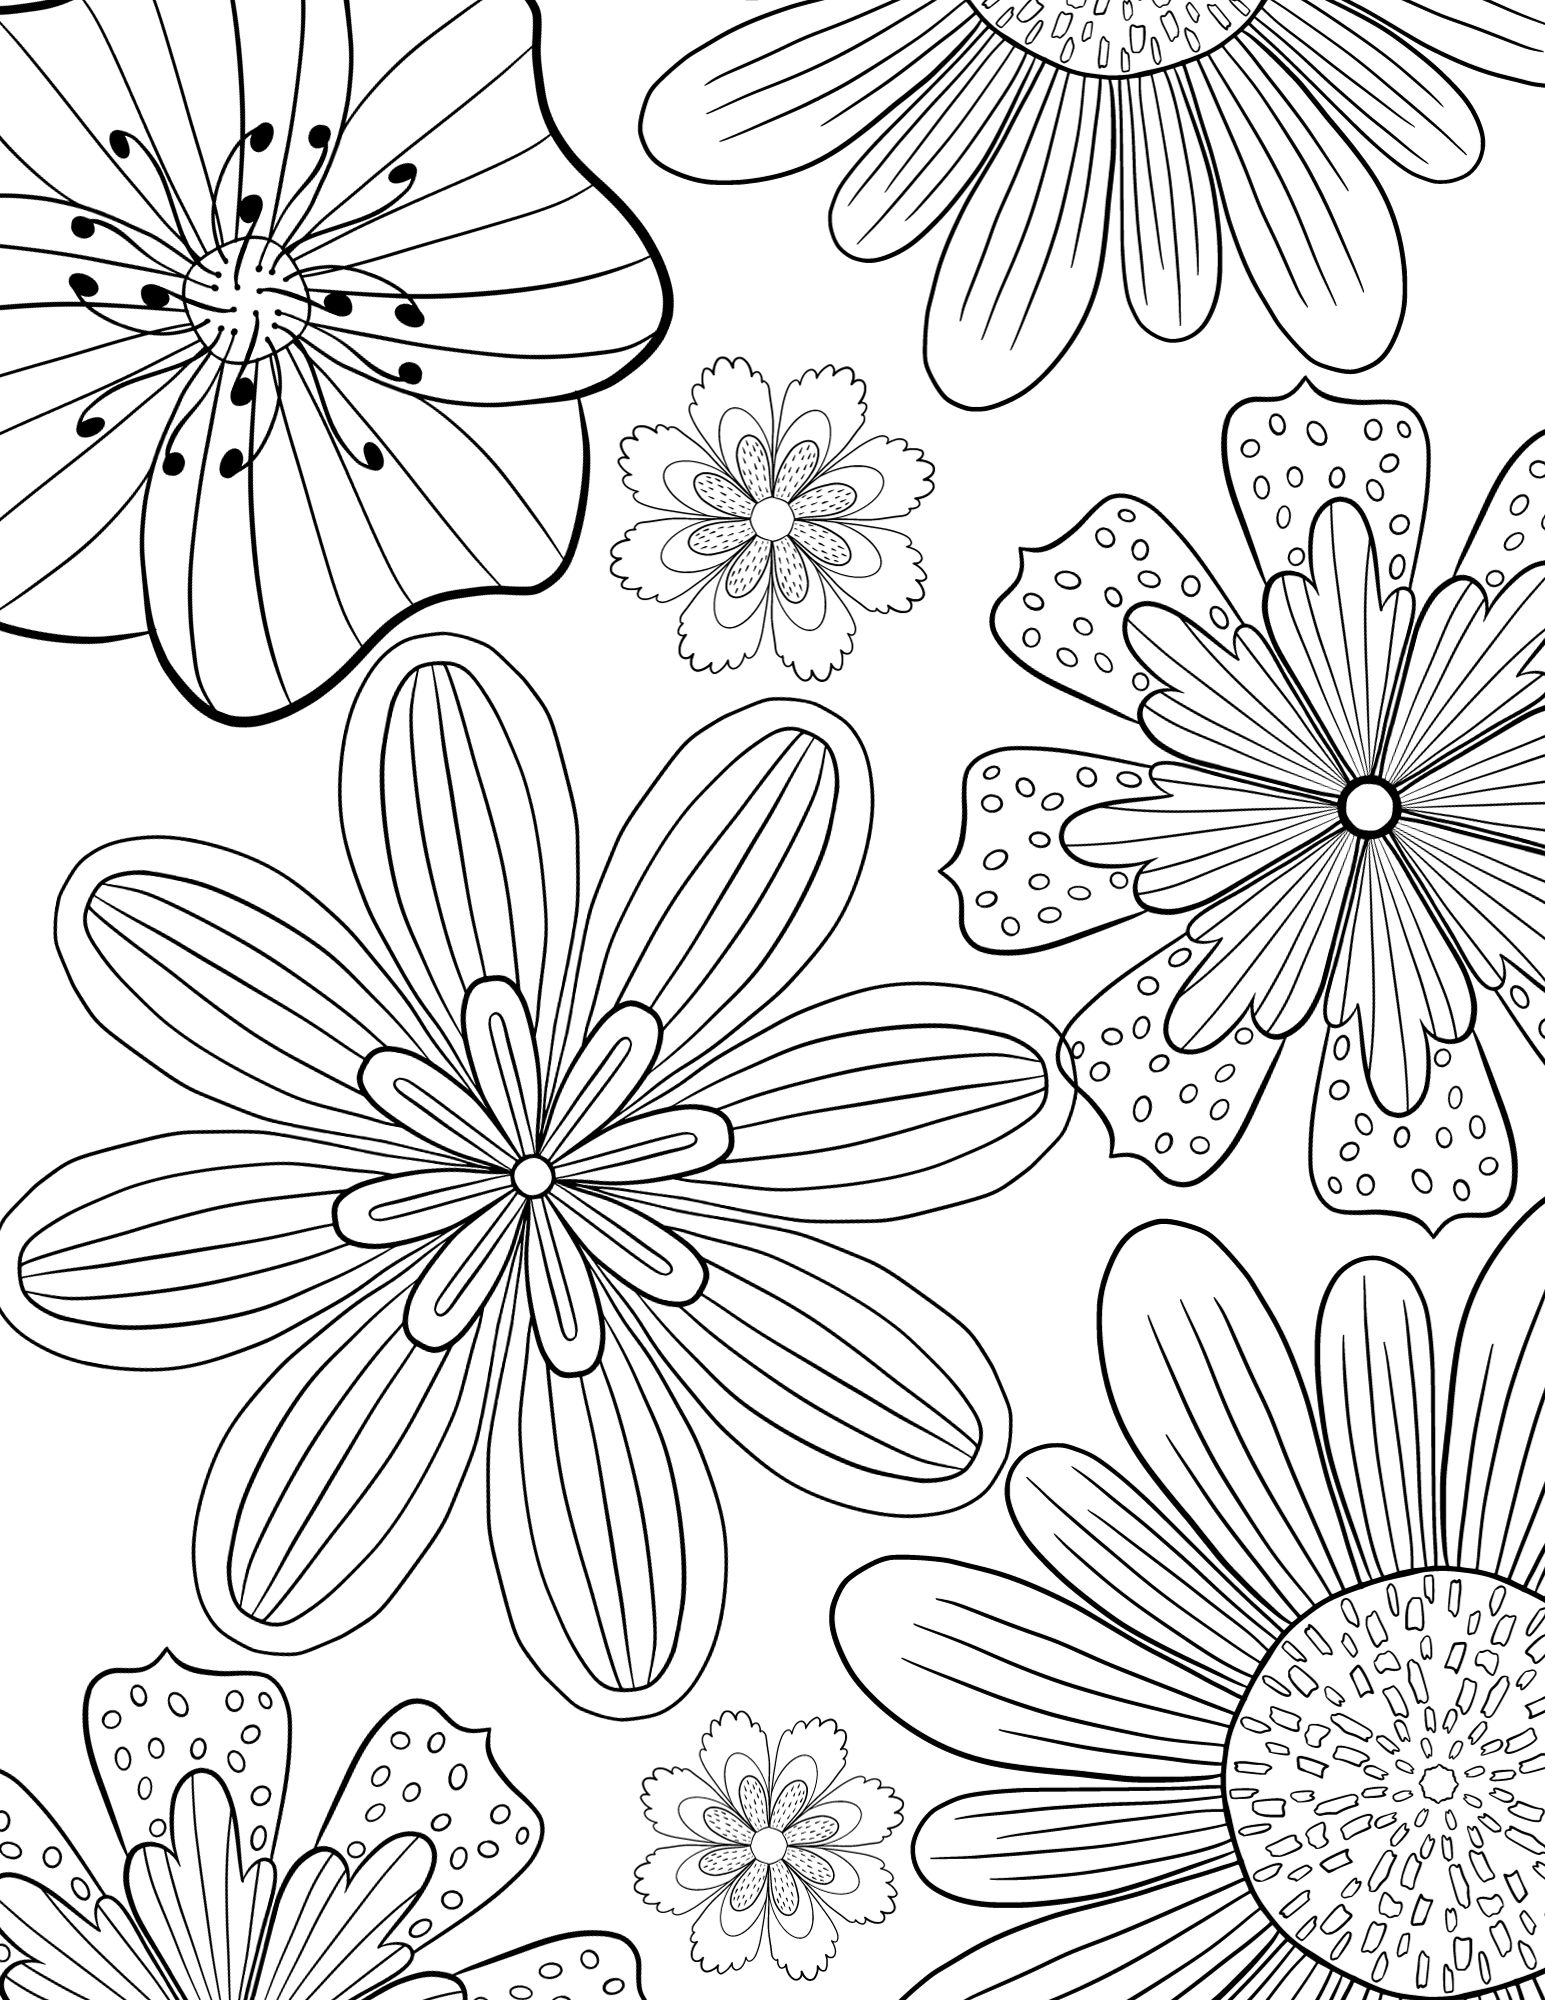 Flower coloring pages to print